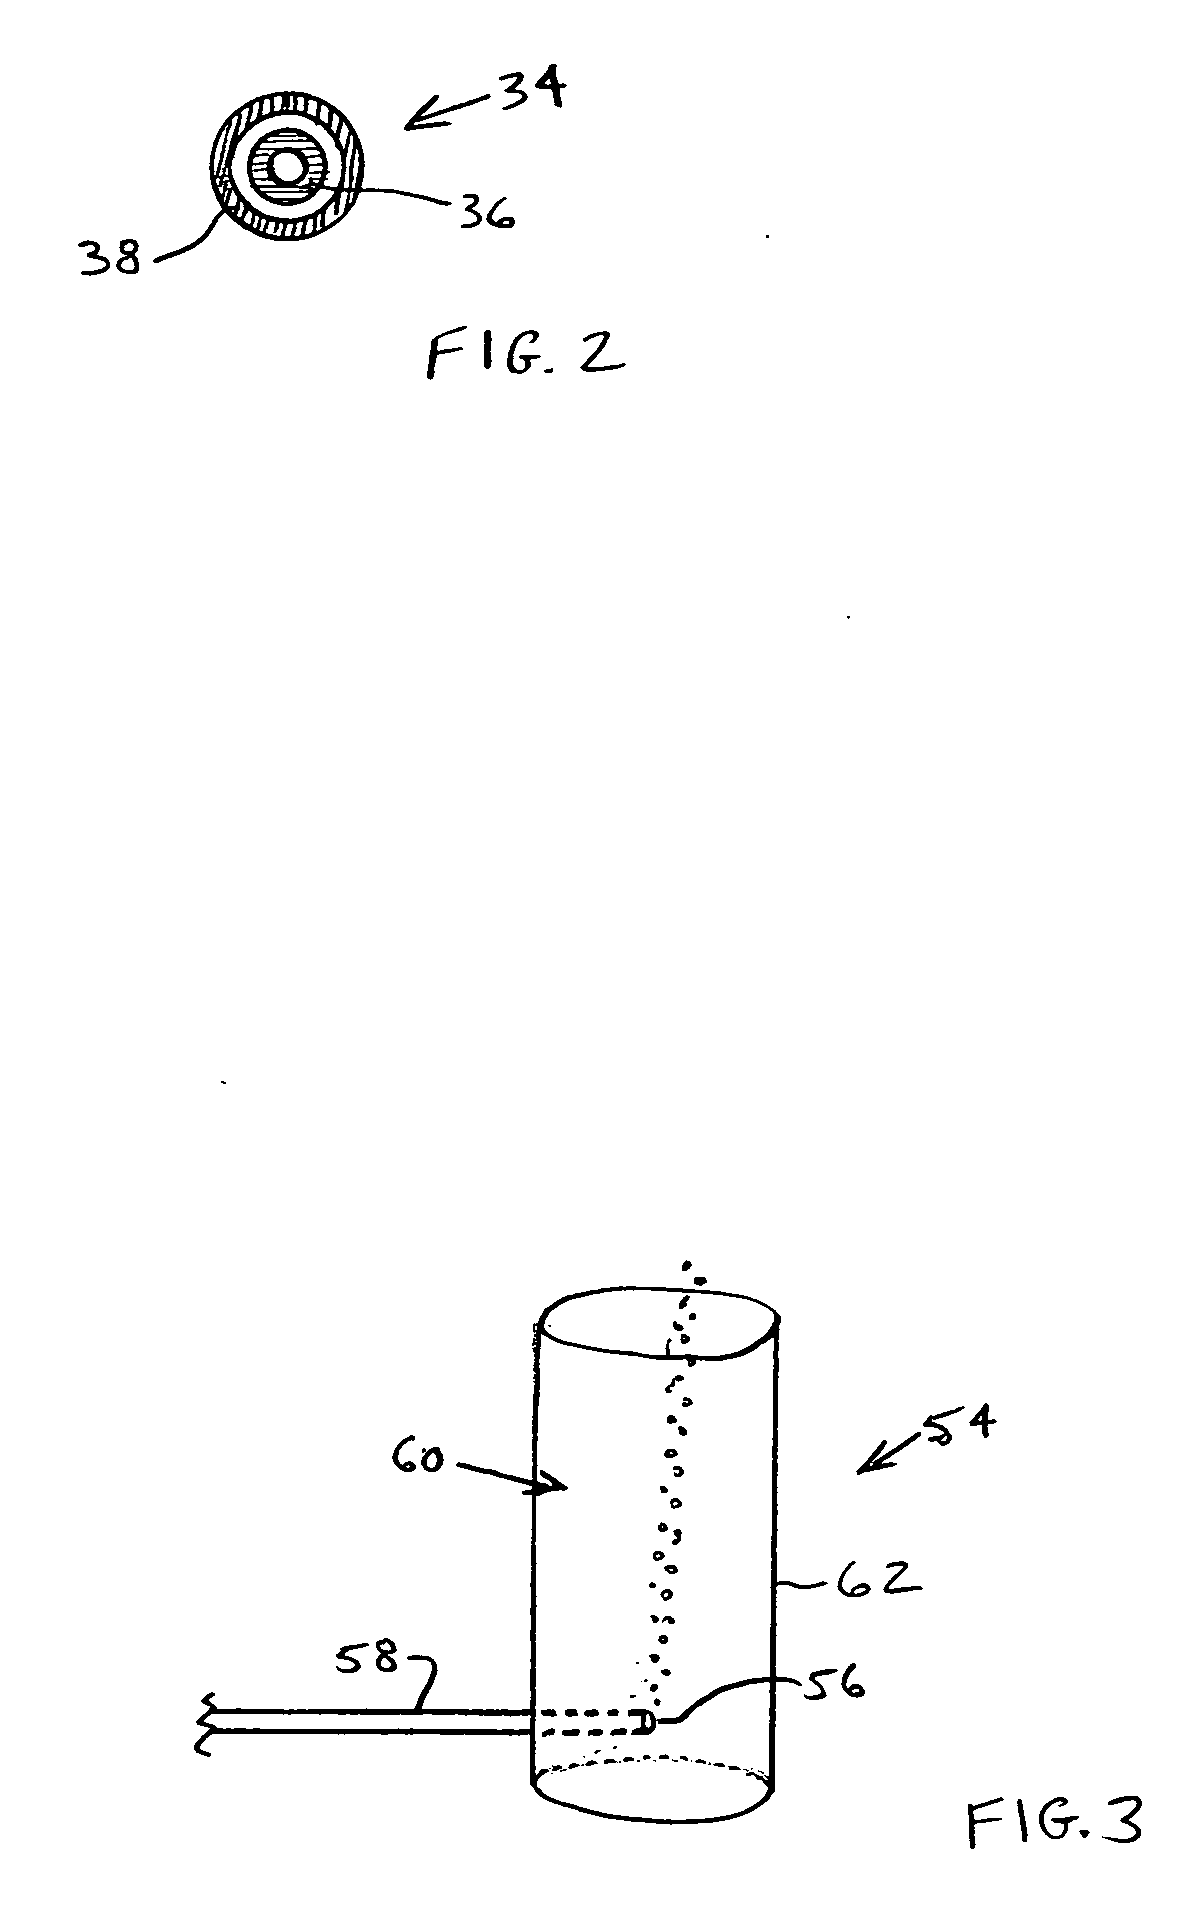 Pressure-based aircraft fuel capacity monitoring system and method